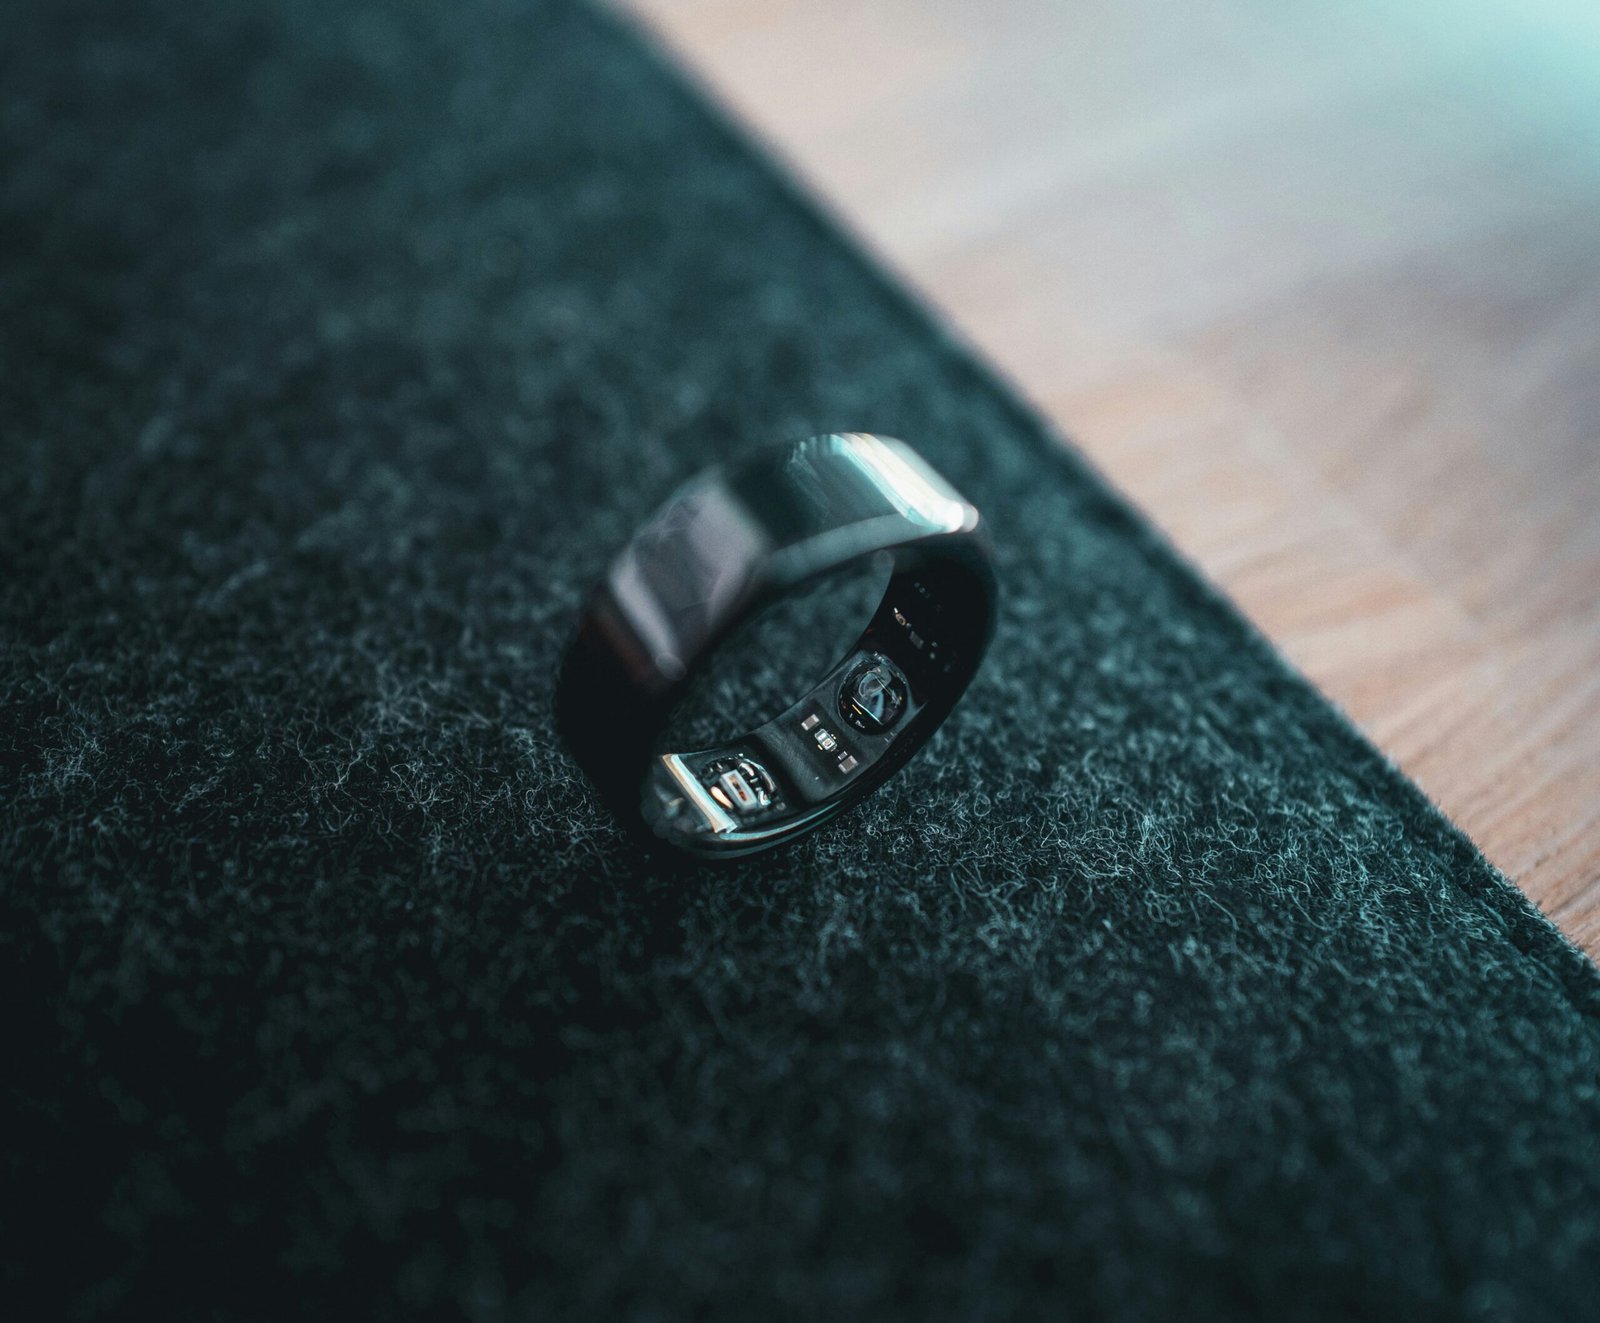 Smart Rings Everything you need to know before getting one